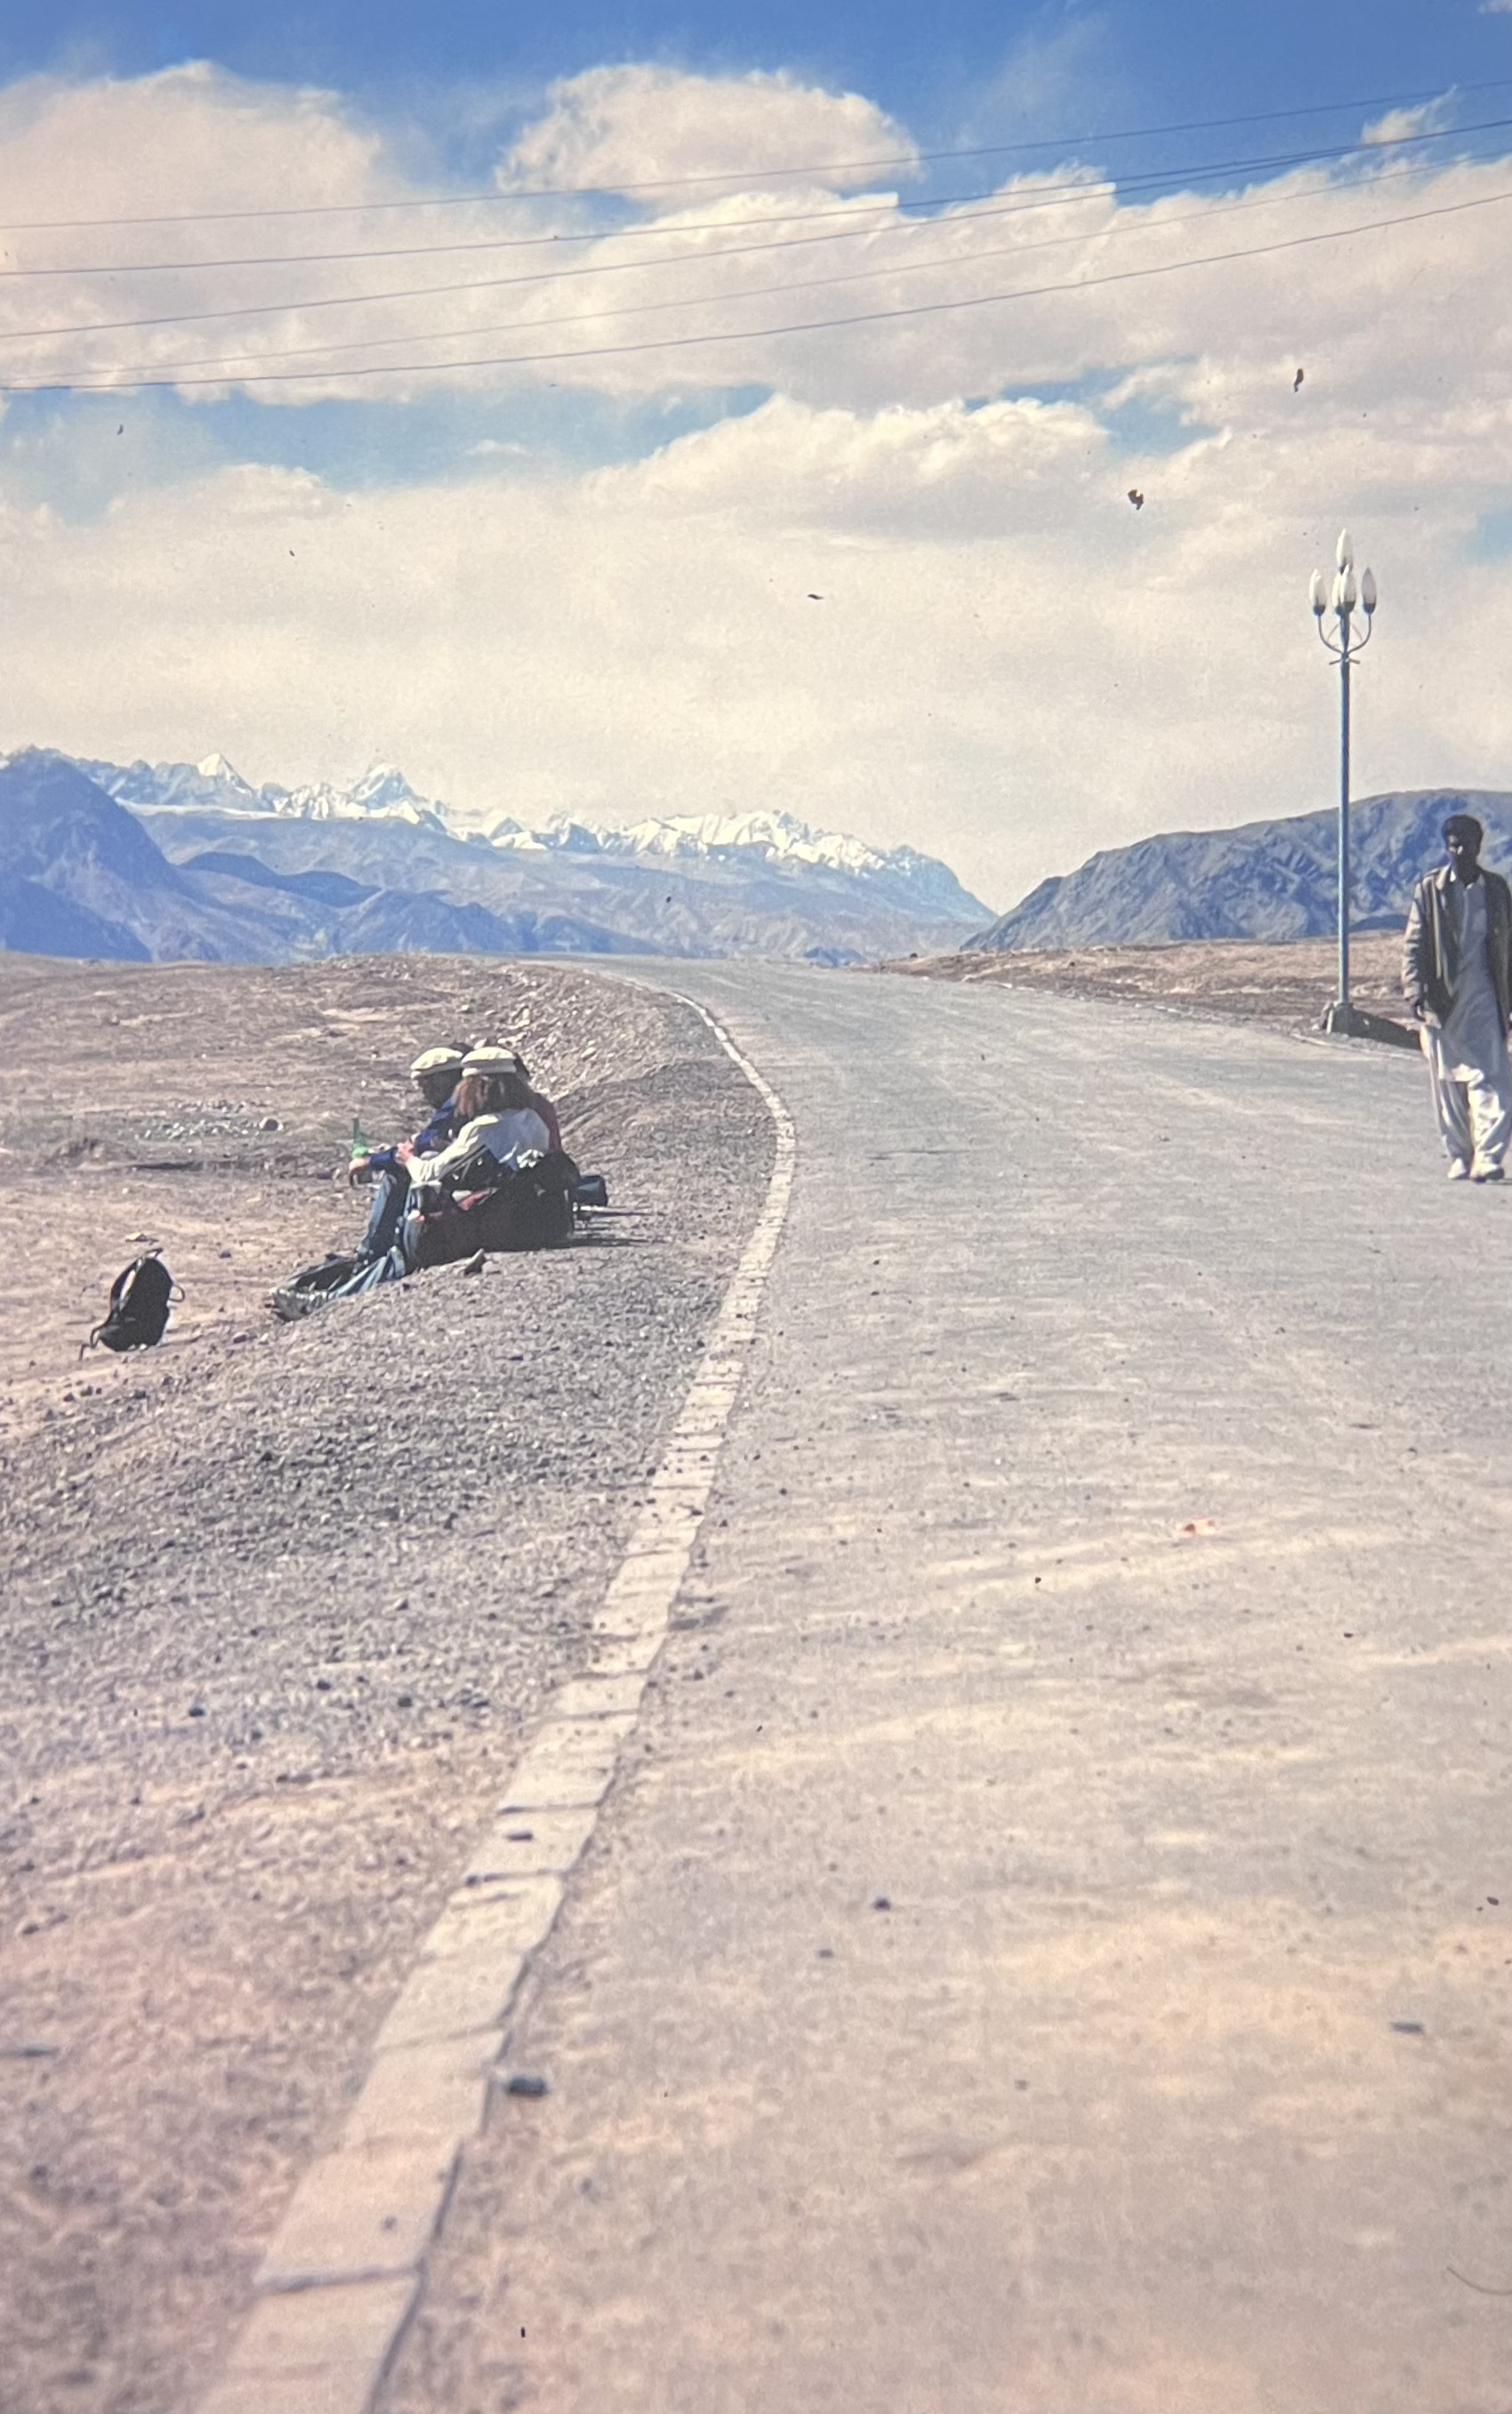 A group of people and their belongings are sitting at the side of a deserted road, with mountainous terrain visible in the background, while another person walks on the opposite side of the road.